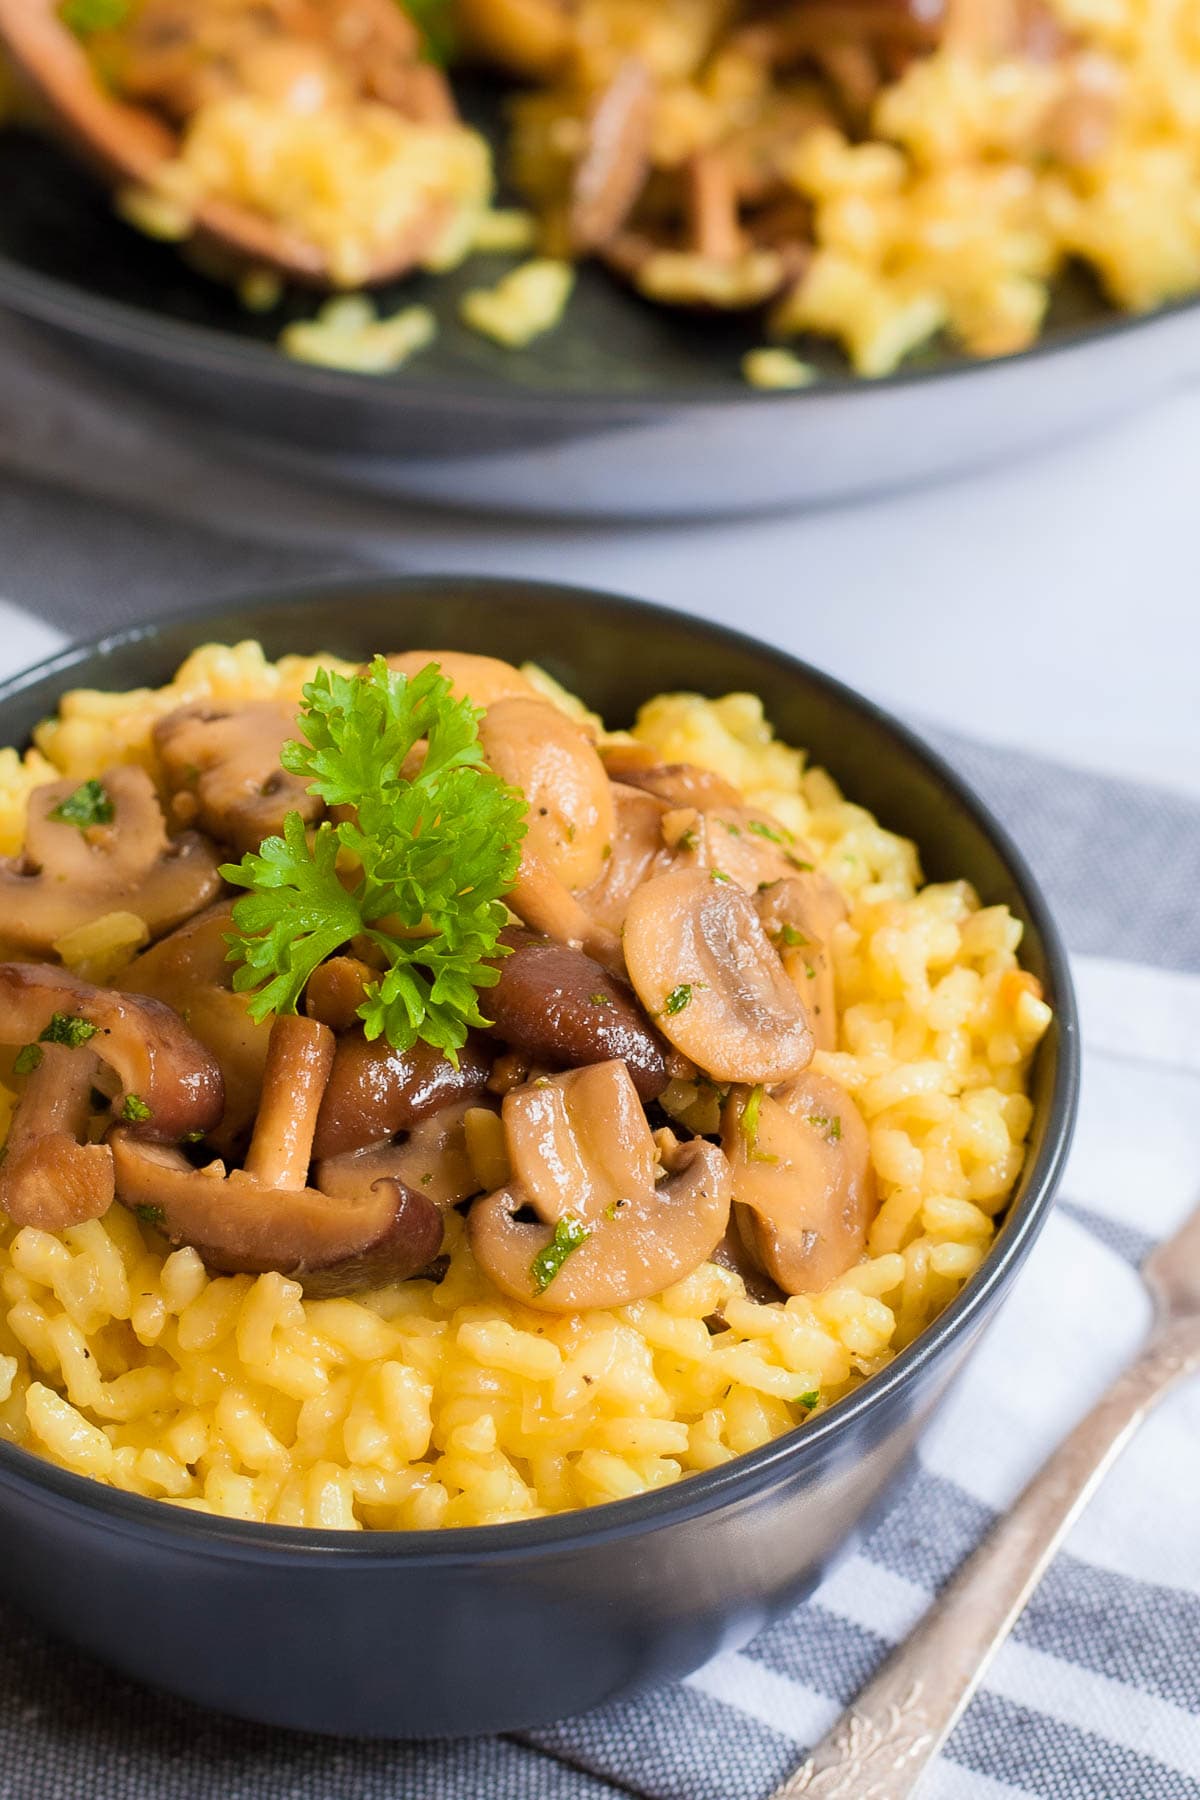 A black bowl of yellow creamy rice topped with brown mushroom slices and green fresh parsley. Leftover risotto is in a black frying pan at the back.